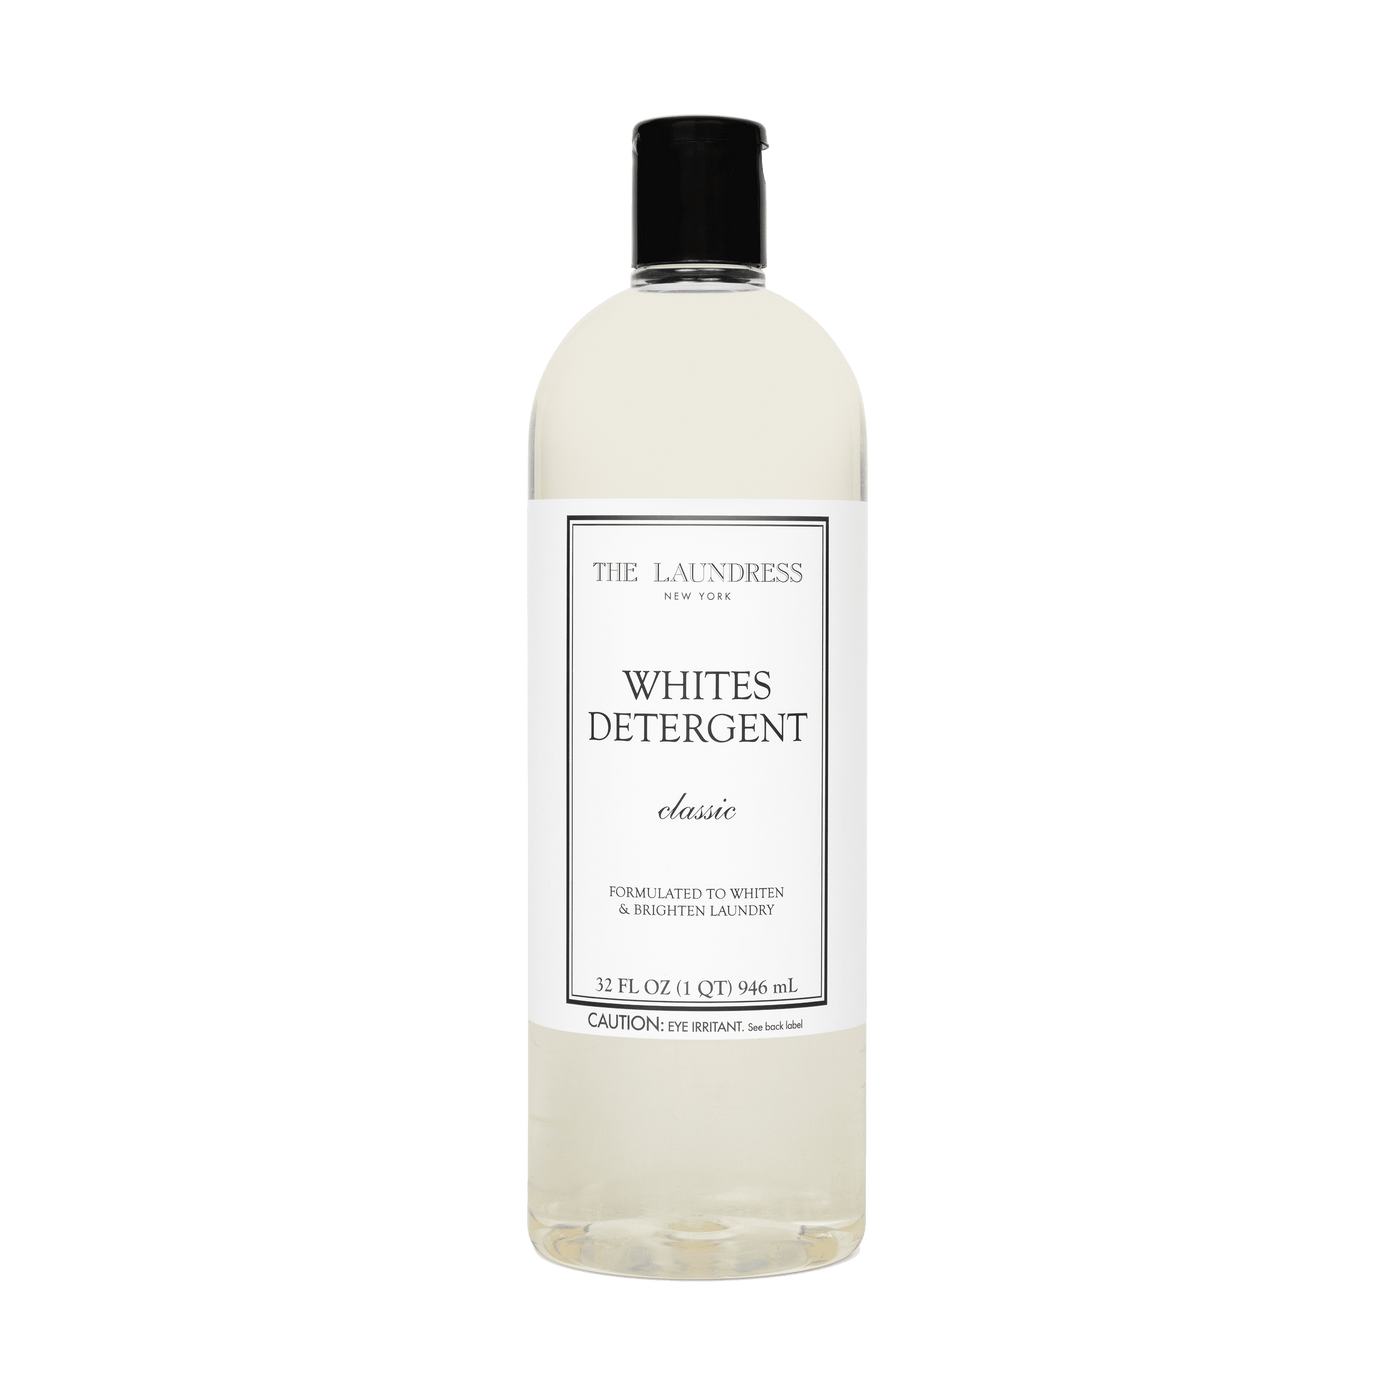 The Laundress Whites Detergent formulated to whiten & brighten laundry laying in water with white fabric.